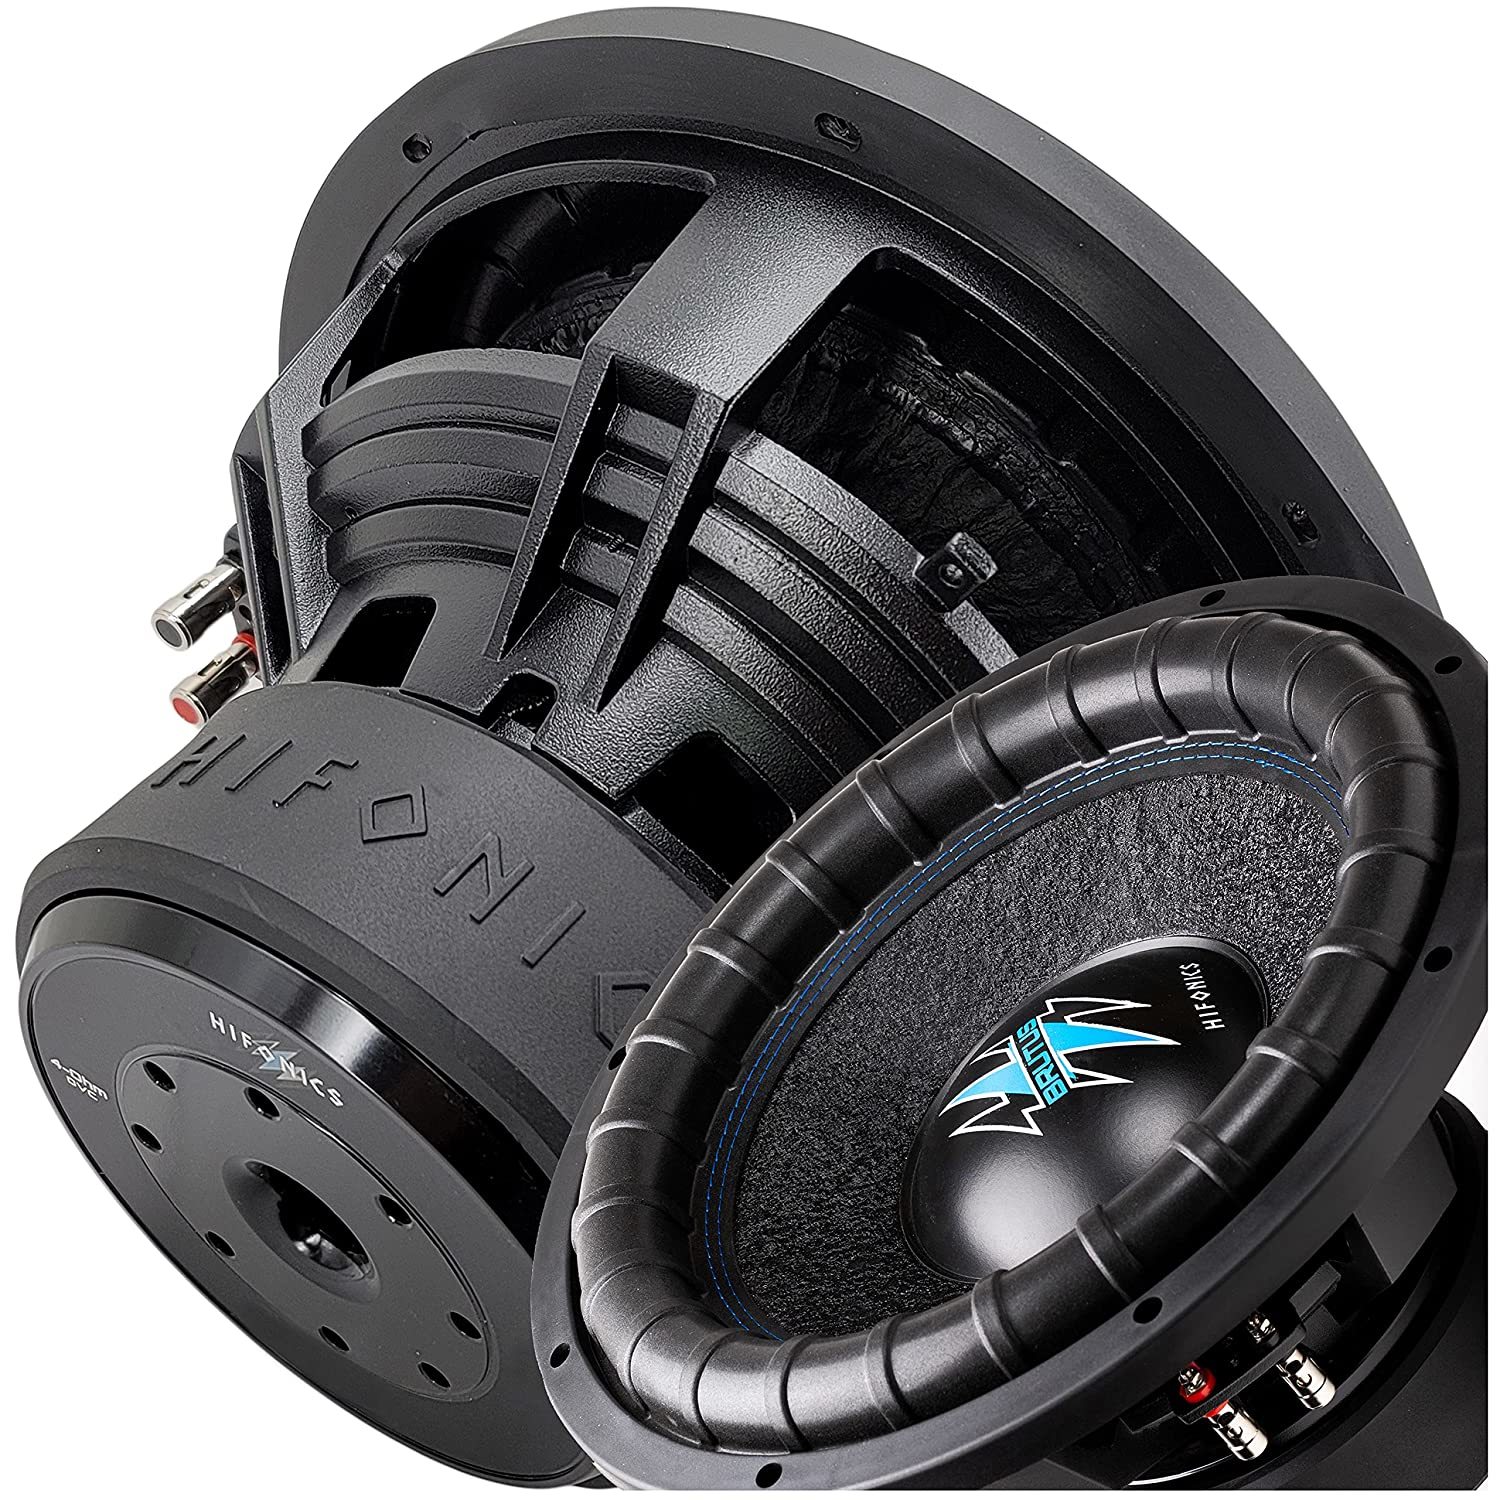 Hifonics BRW15D4 3000 Watts 15 Inch Brutus Car Audio Subwoofer with Heavy Gauge,